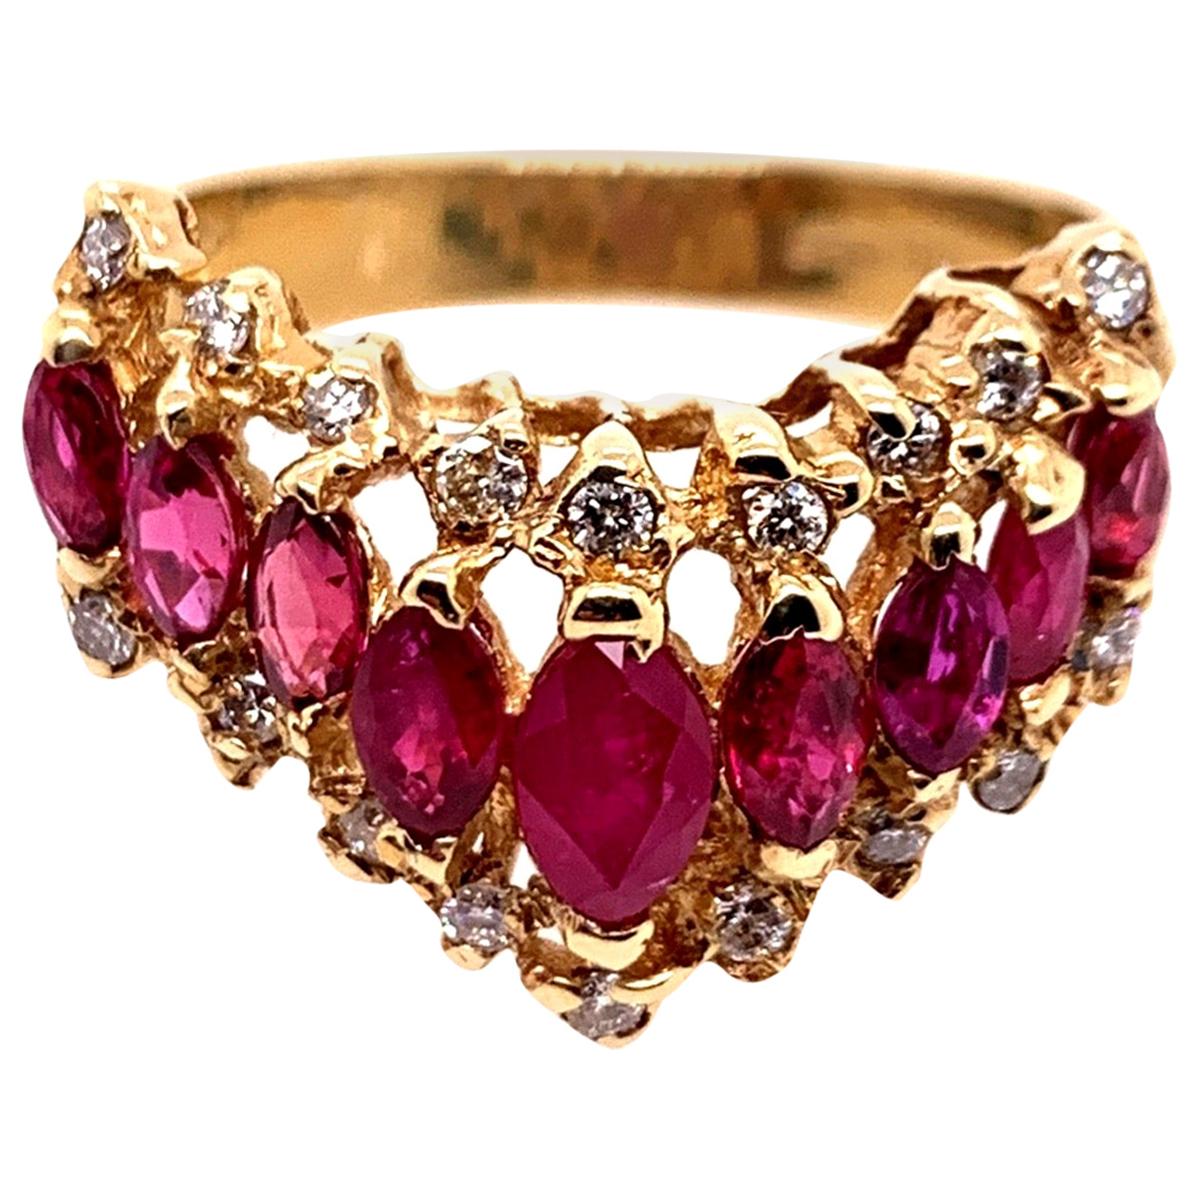 Retro Gold 1.15 Carat Natural Marquise Ruby and Diamond Cocktail Ring circa 1960 For Sale